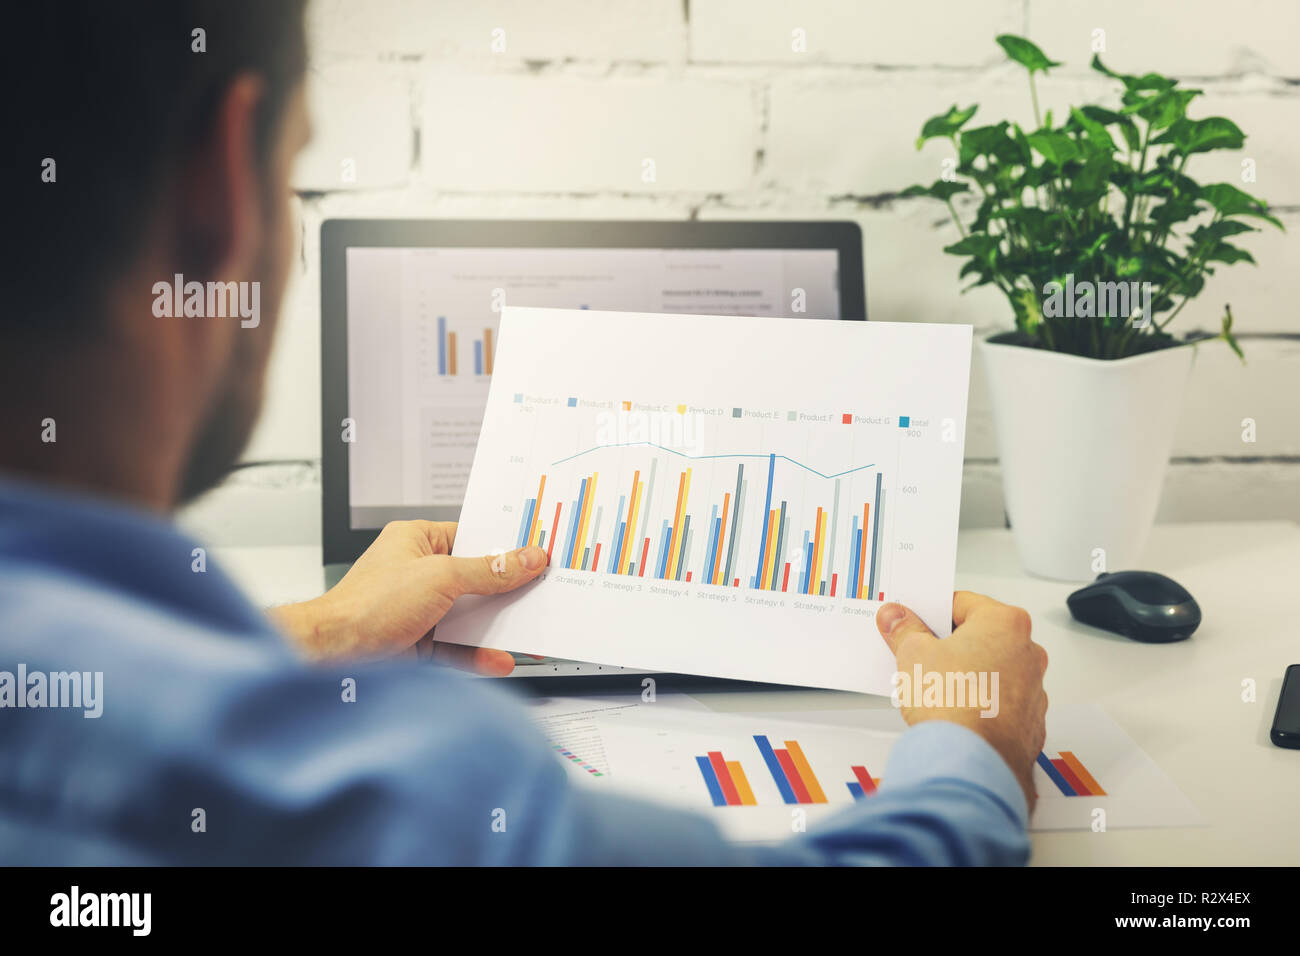 man working with business statistics data in office Stock Photo